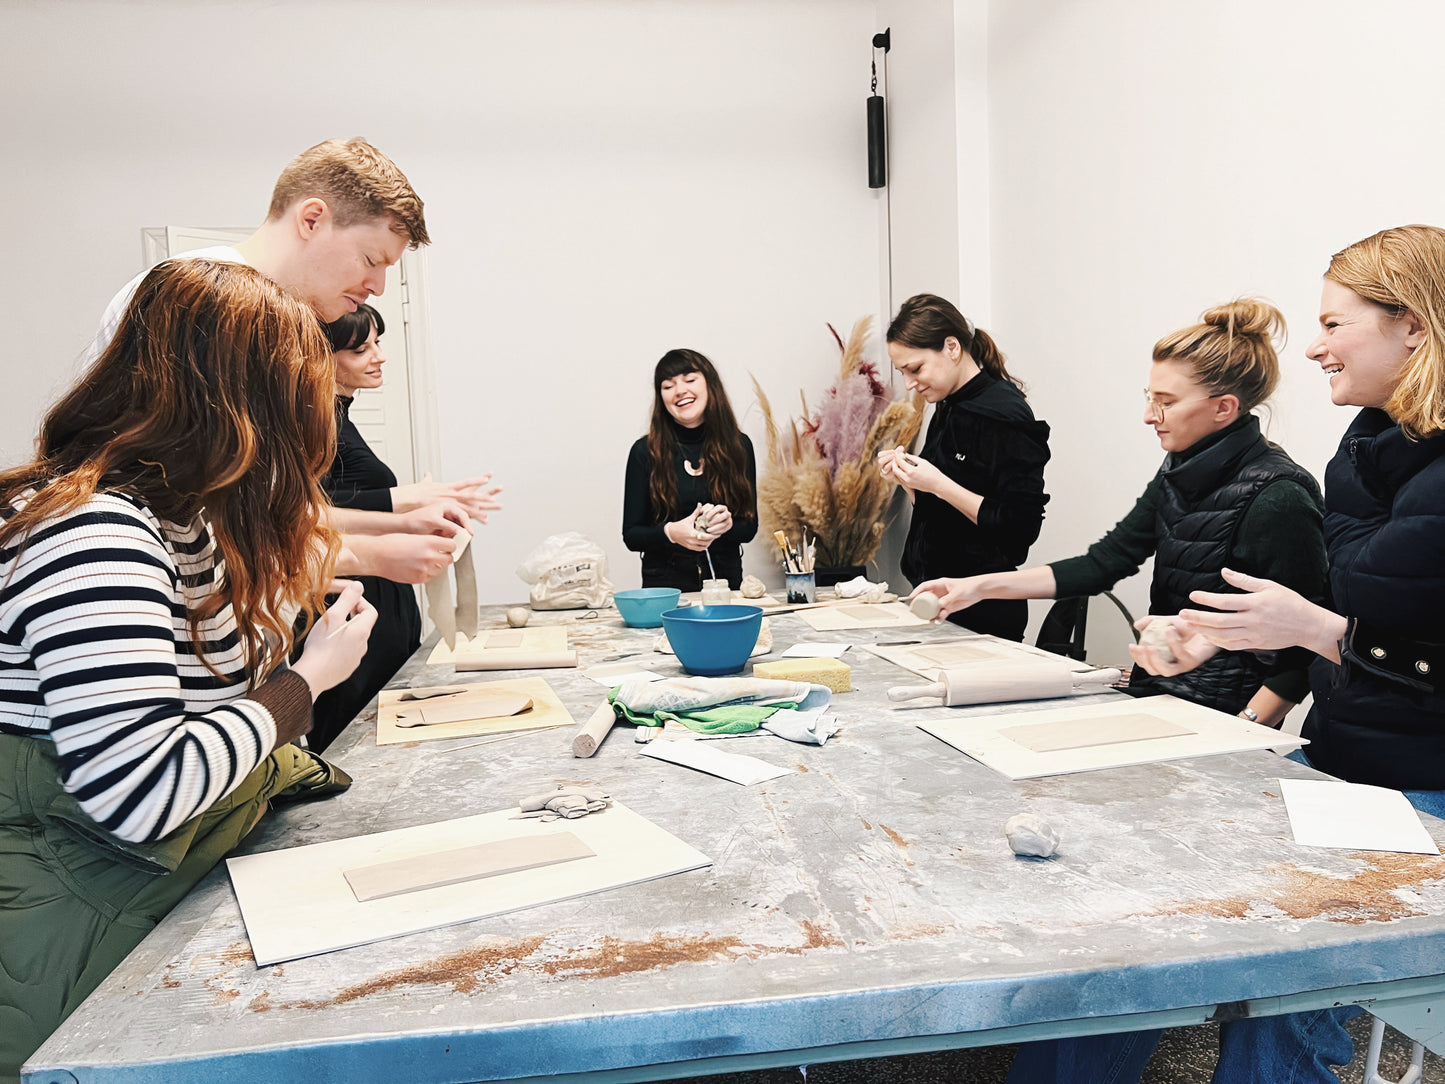 Creative Hand Building Ceramics Workshop with Keegan in Berlin, Germany by subcultours